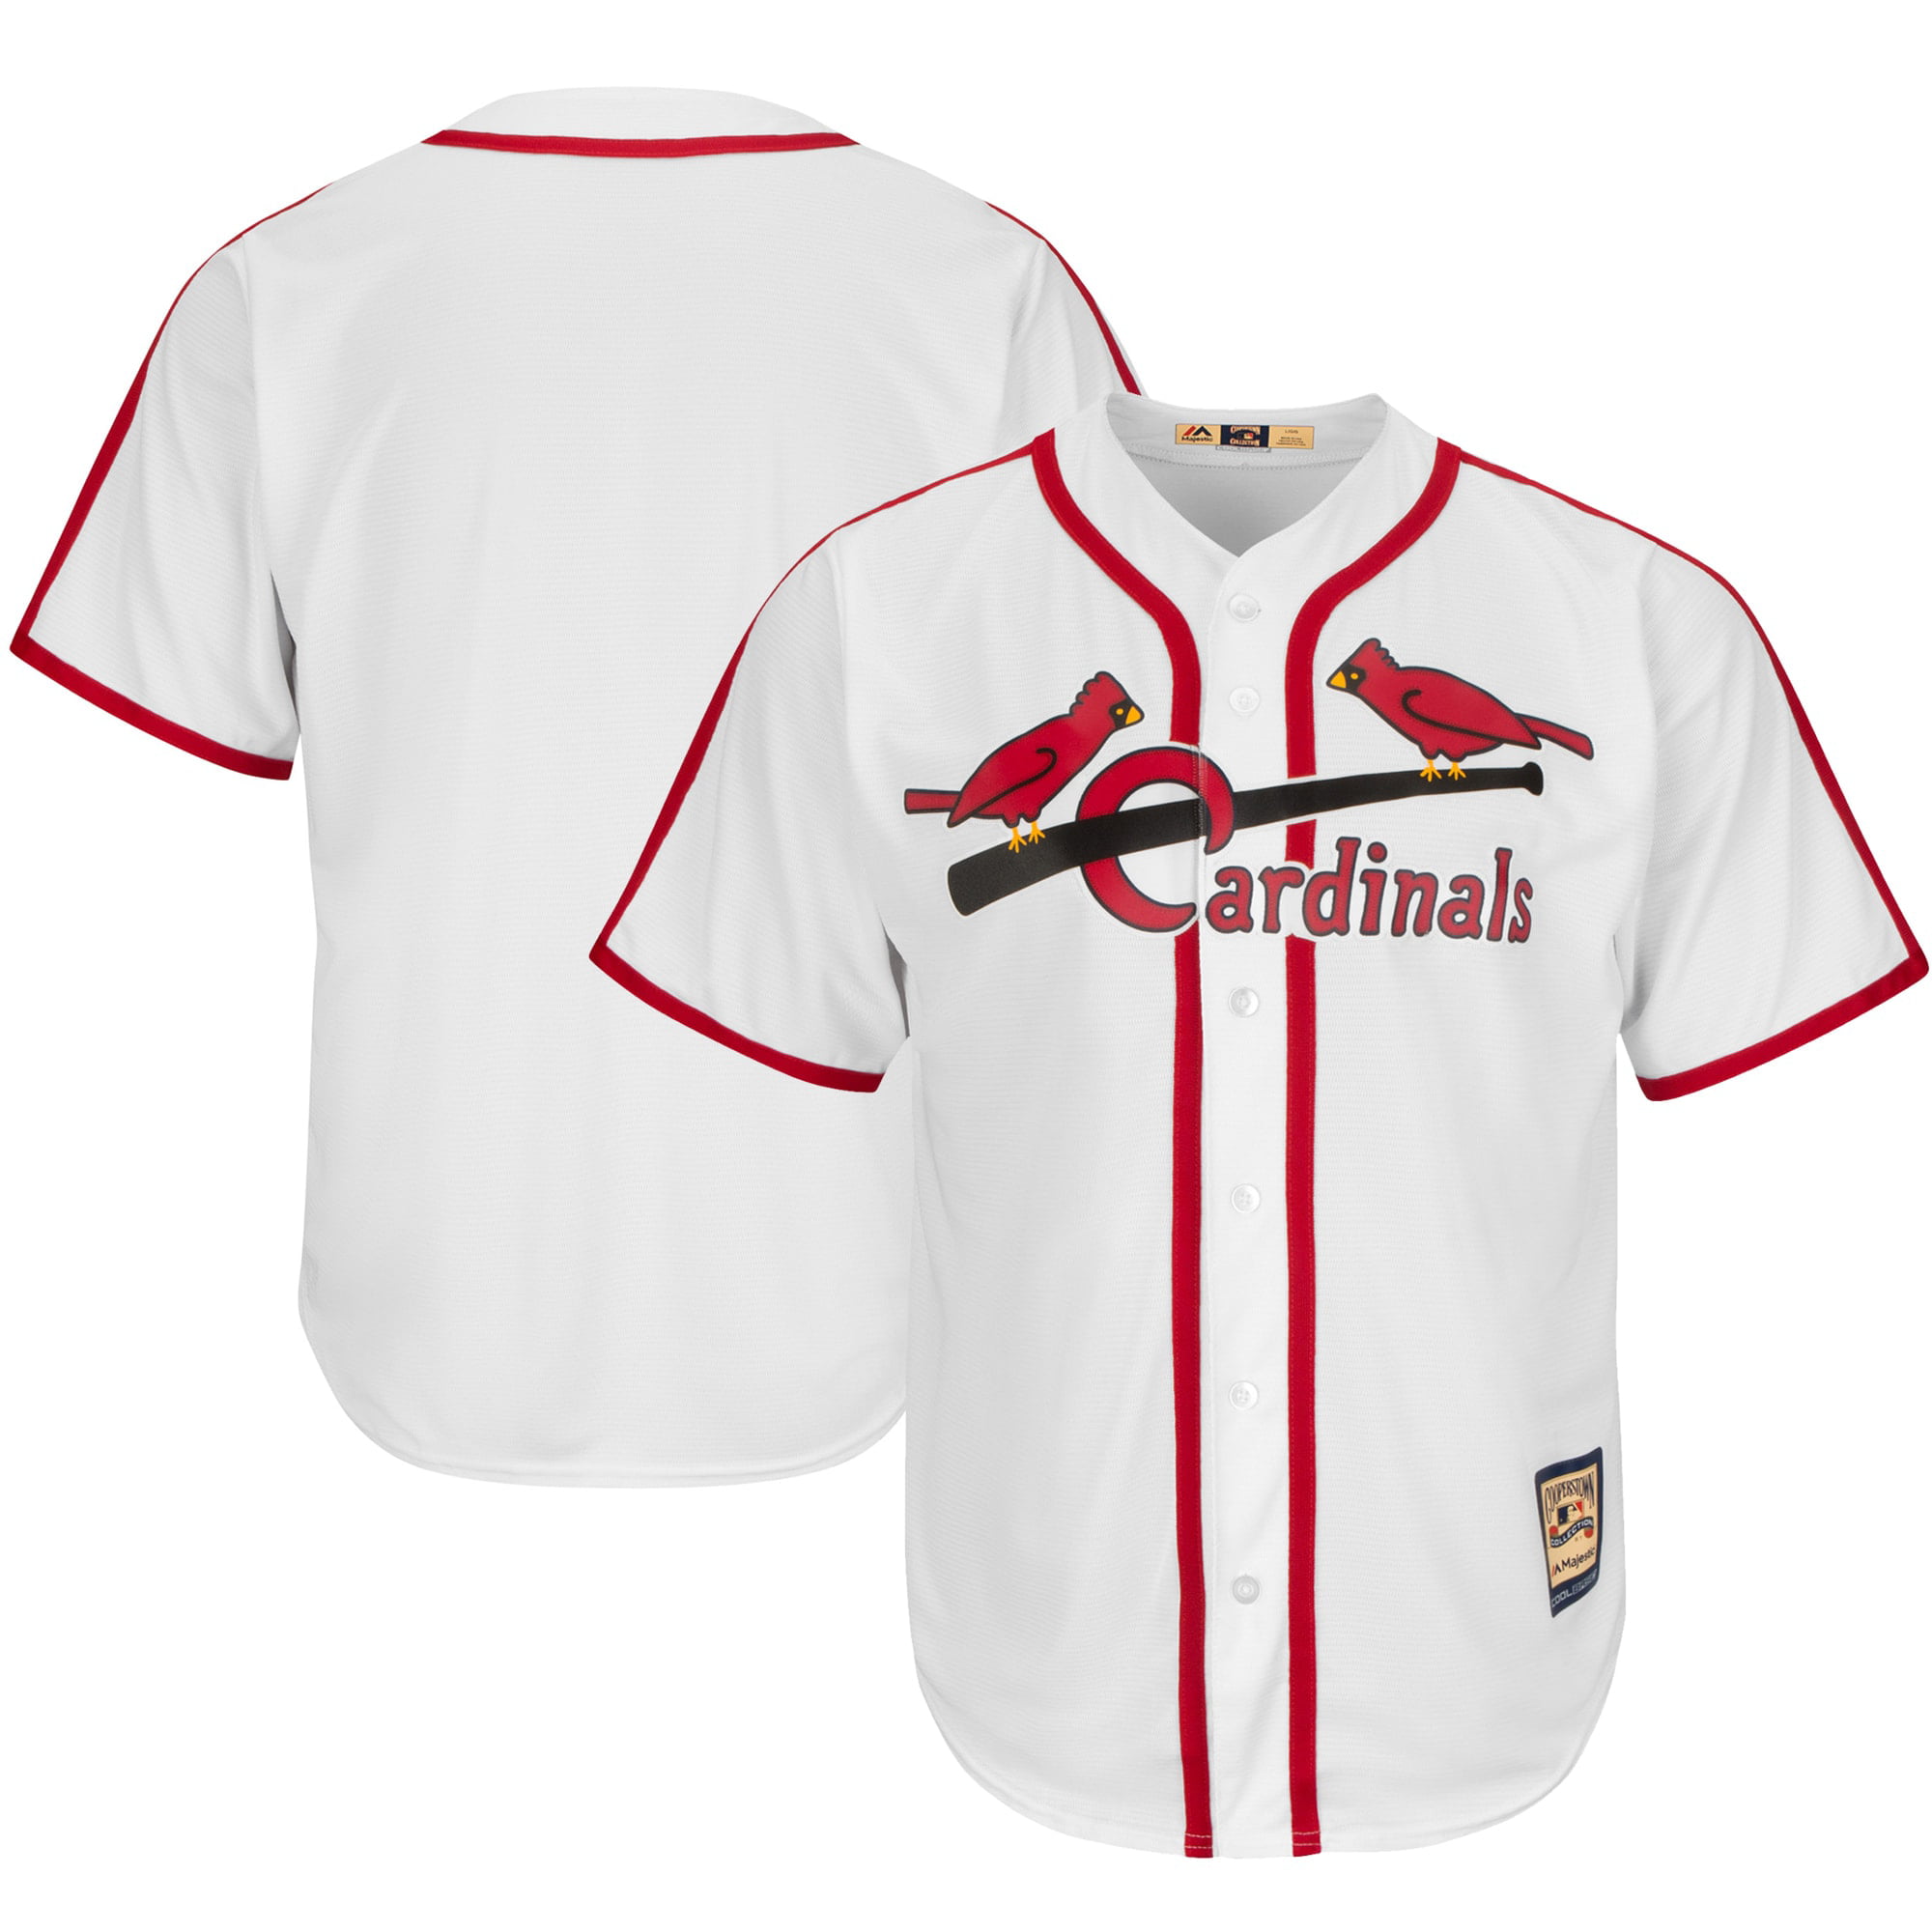 St. Louis Cardinals Majestic Cooperstown Cool Base Team Jersey - White - Walmart.com ...